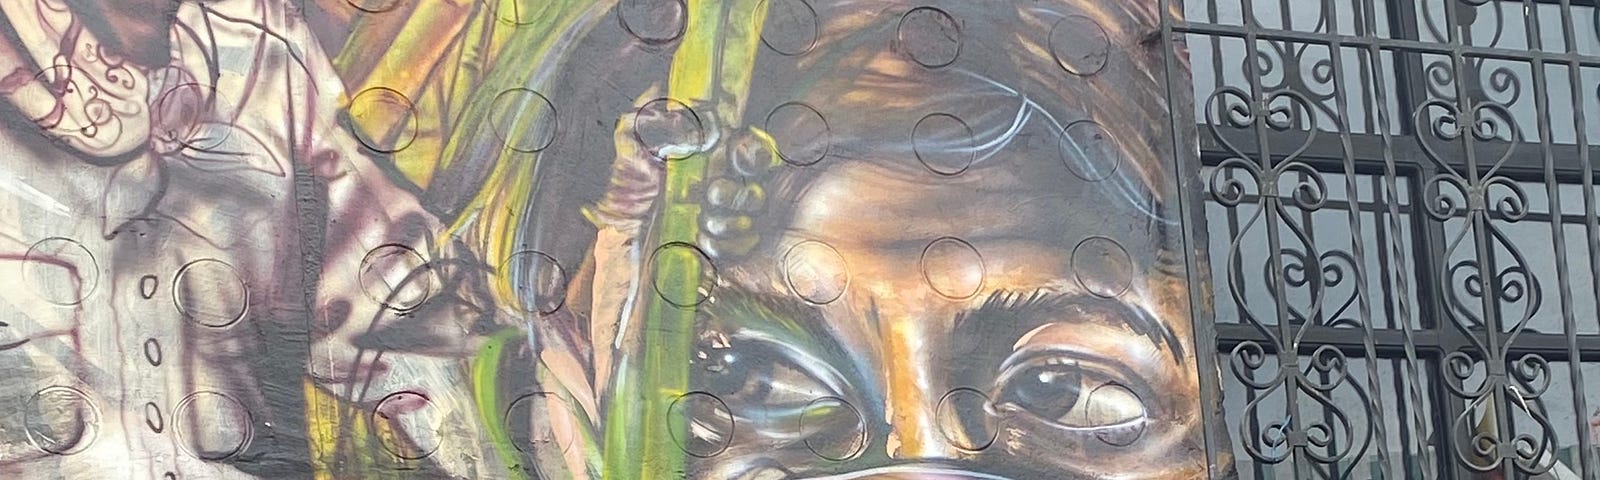 A mural in downtown Cali, which depicts a woman with a mask